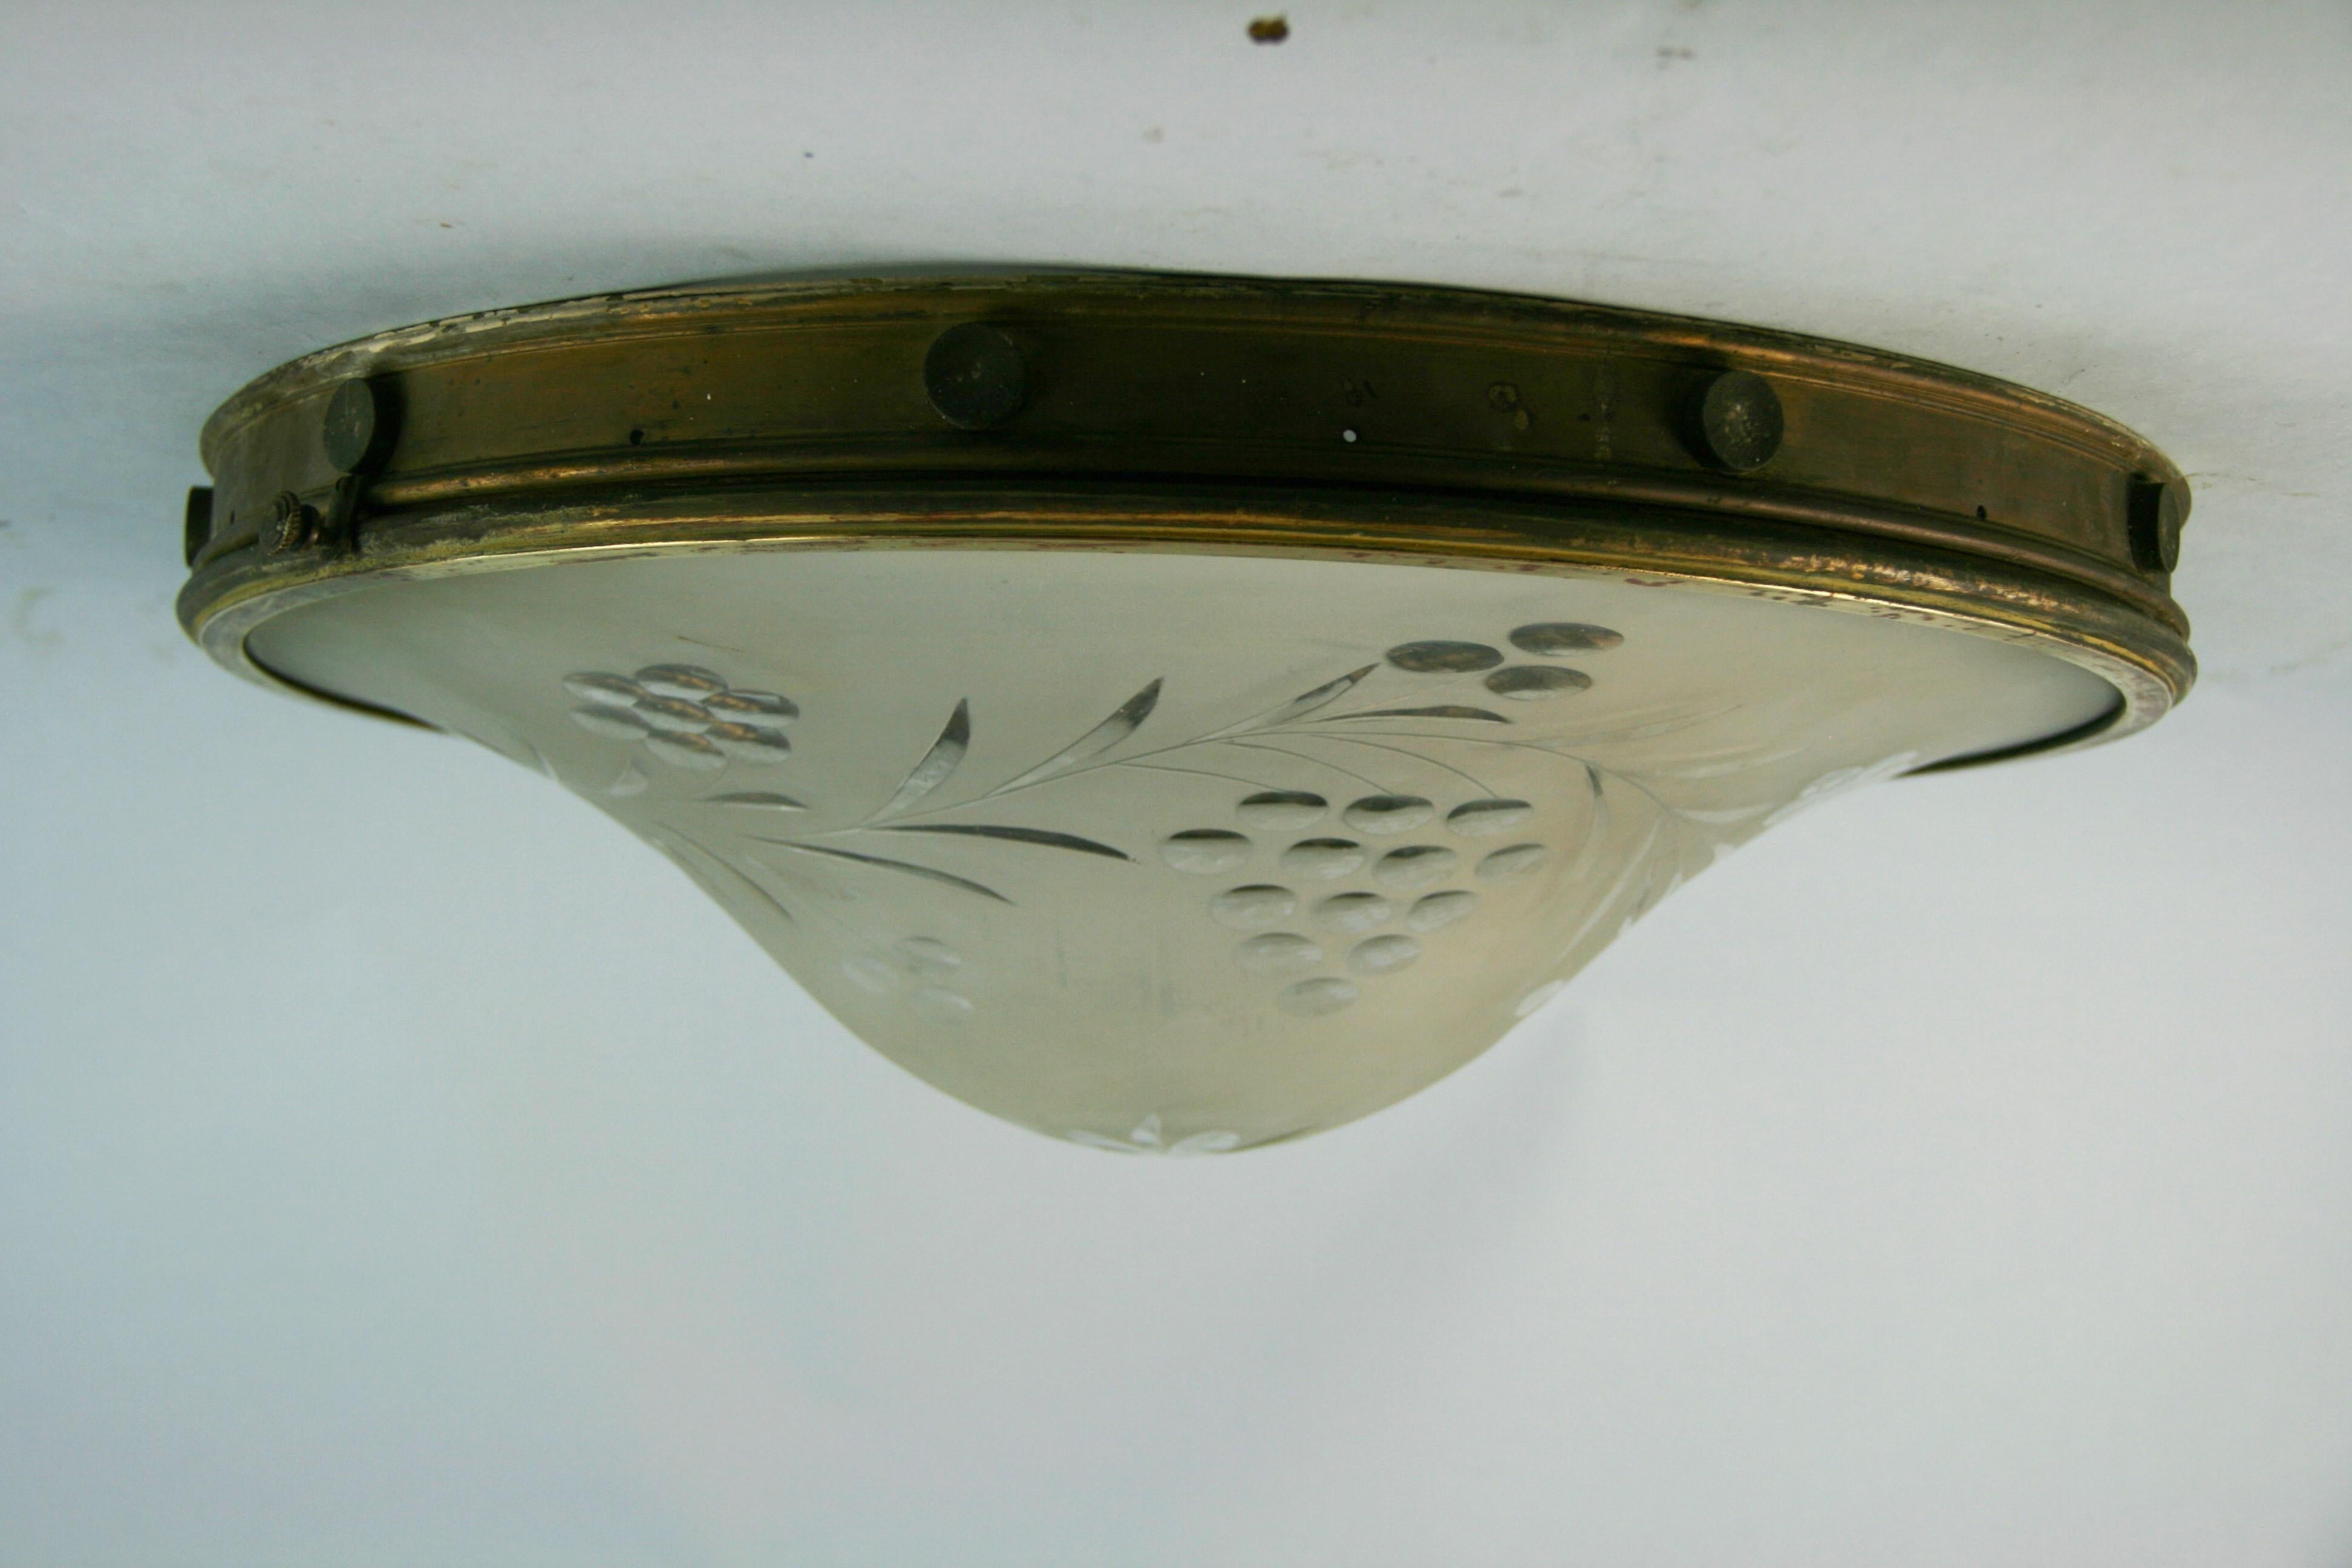 3-815 Floral frosted wheel gut glass with hinged top
Takes 3 Edison based bulbs
Needs rewiring.